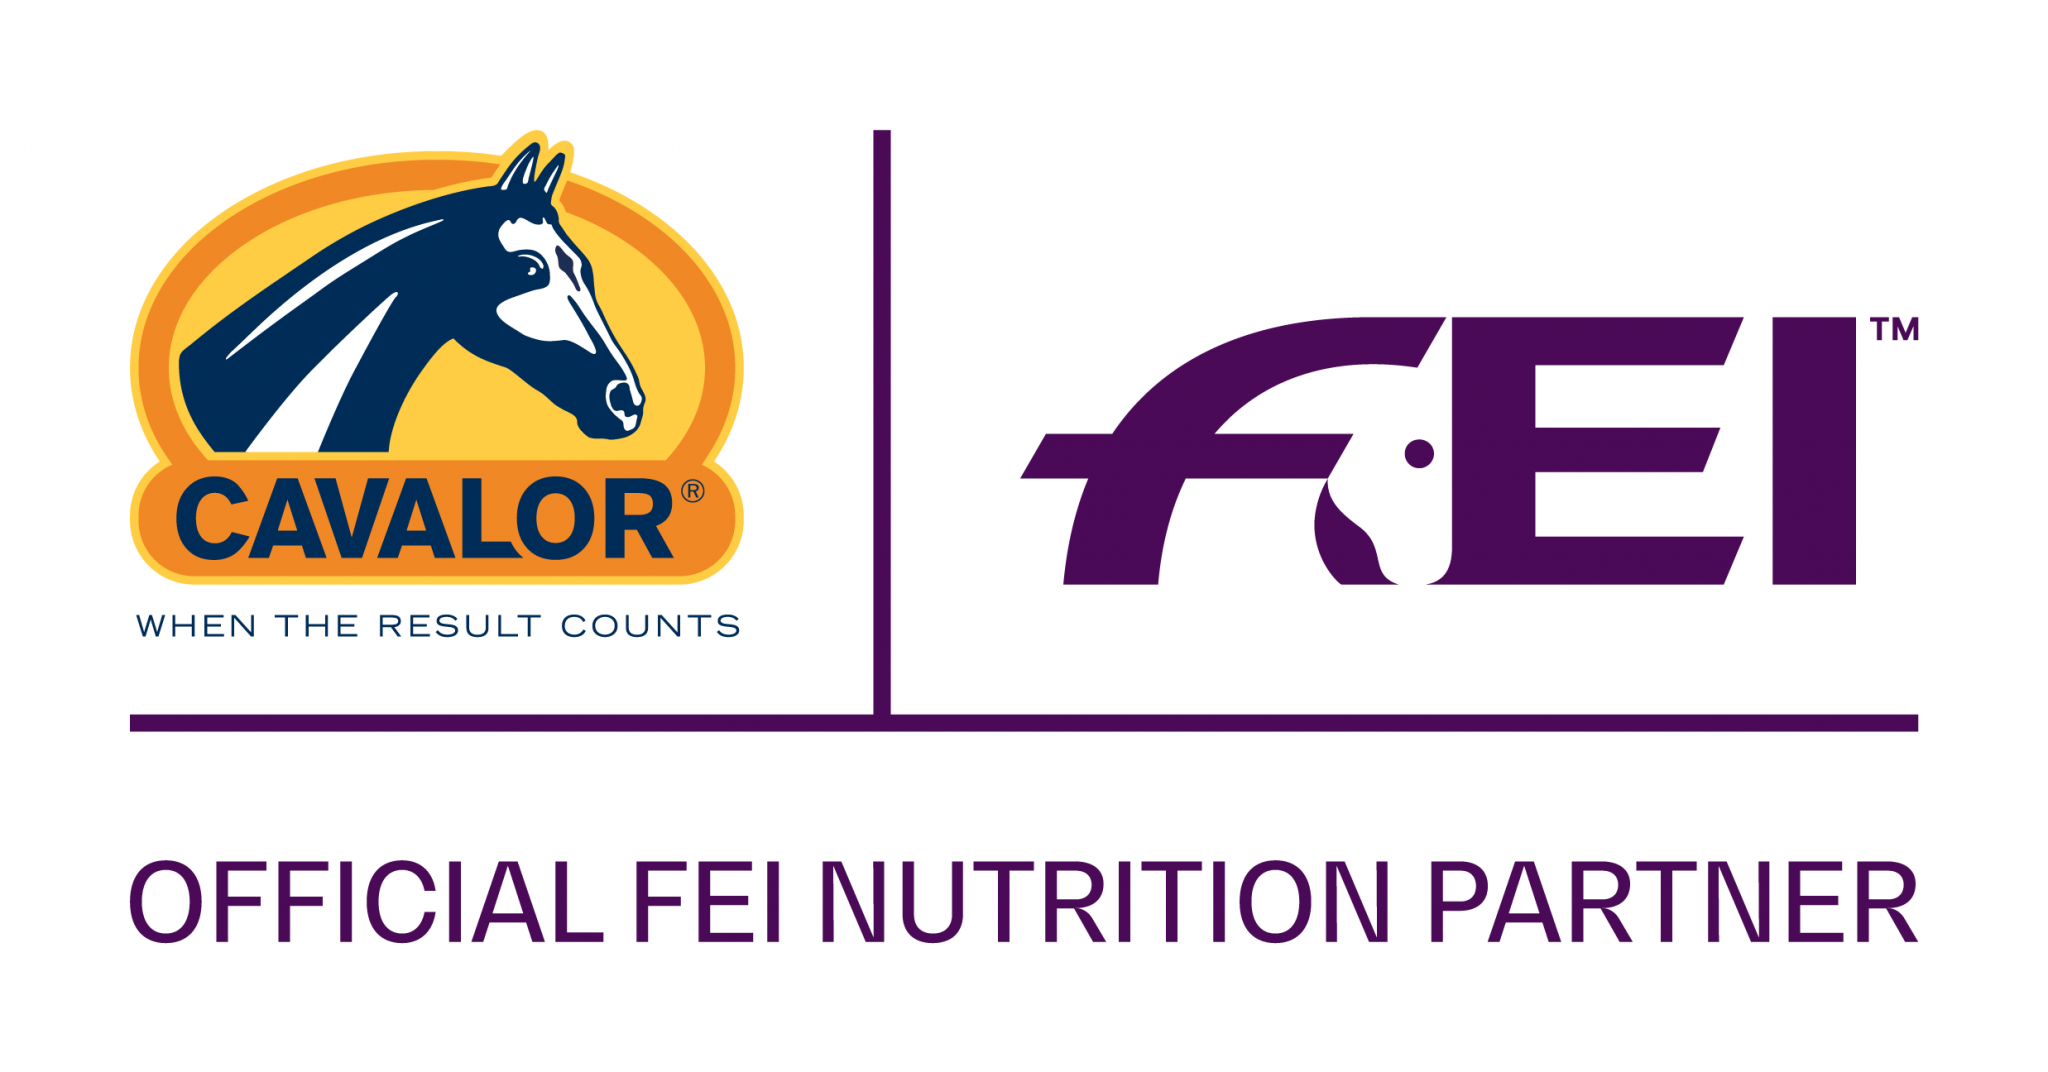 Cavalor has signed a deal to become the official nutrition partner of the International Equestrian Federation ©FEI